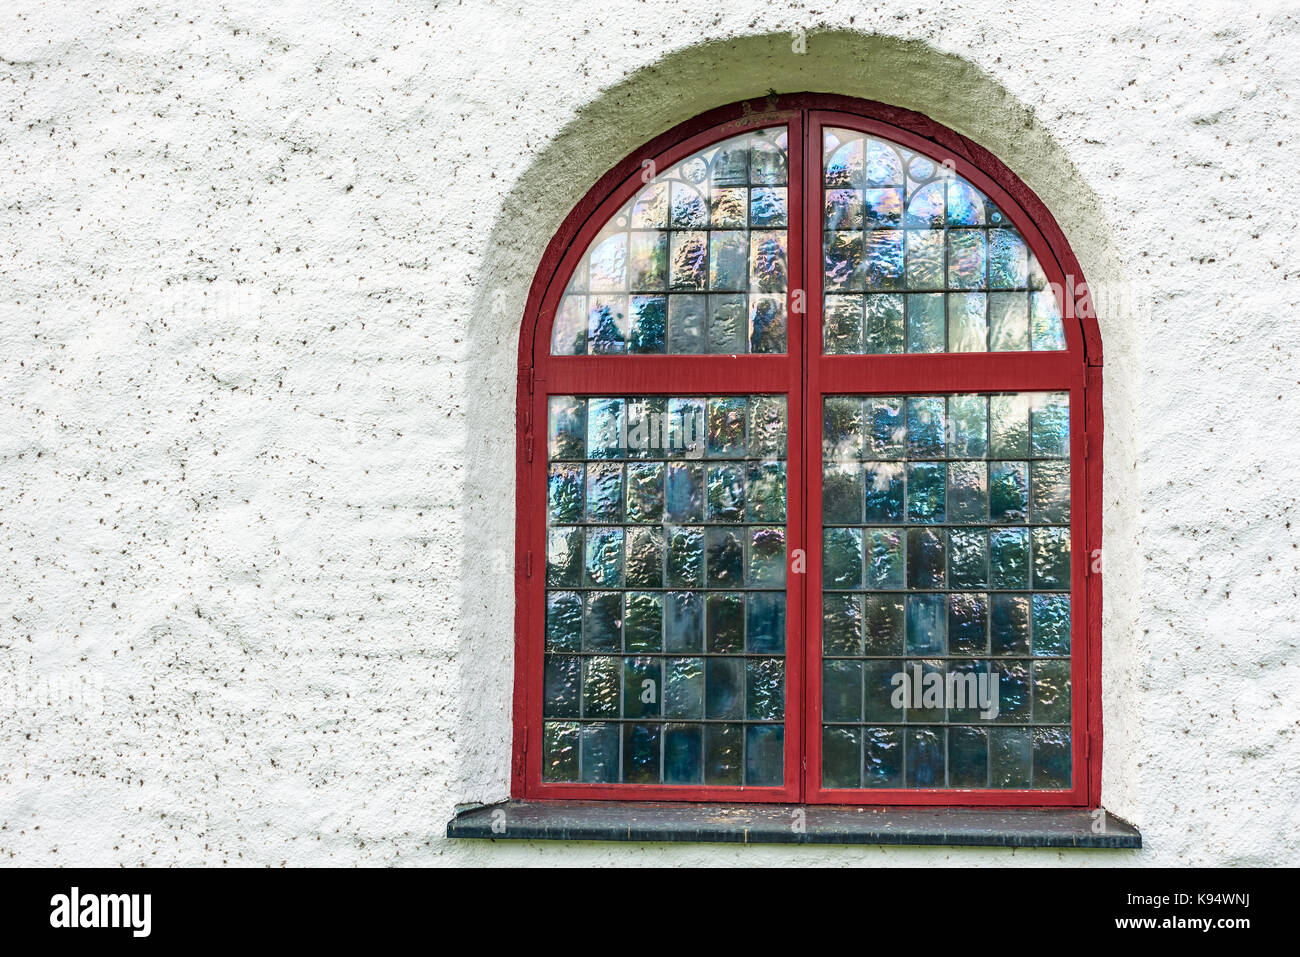 Iridescent window with red frame on white church. Stock Photo